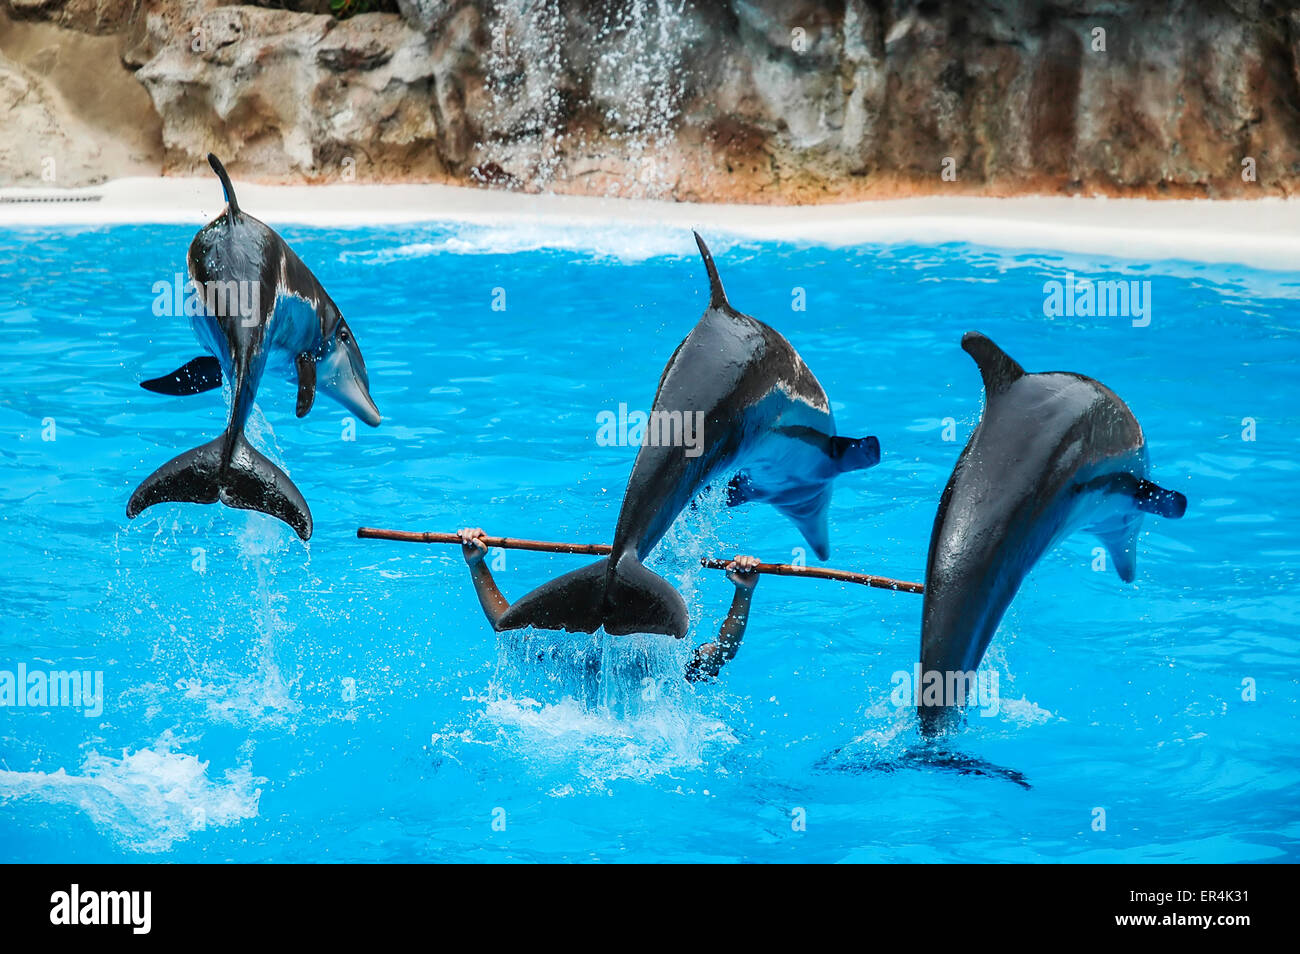 three dolphins during an aquatic show Stock Photo